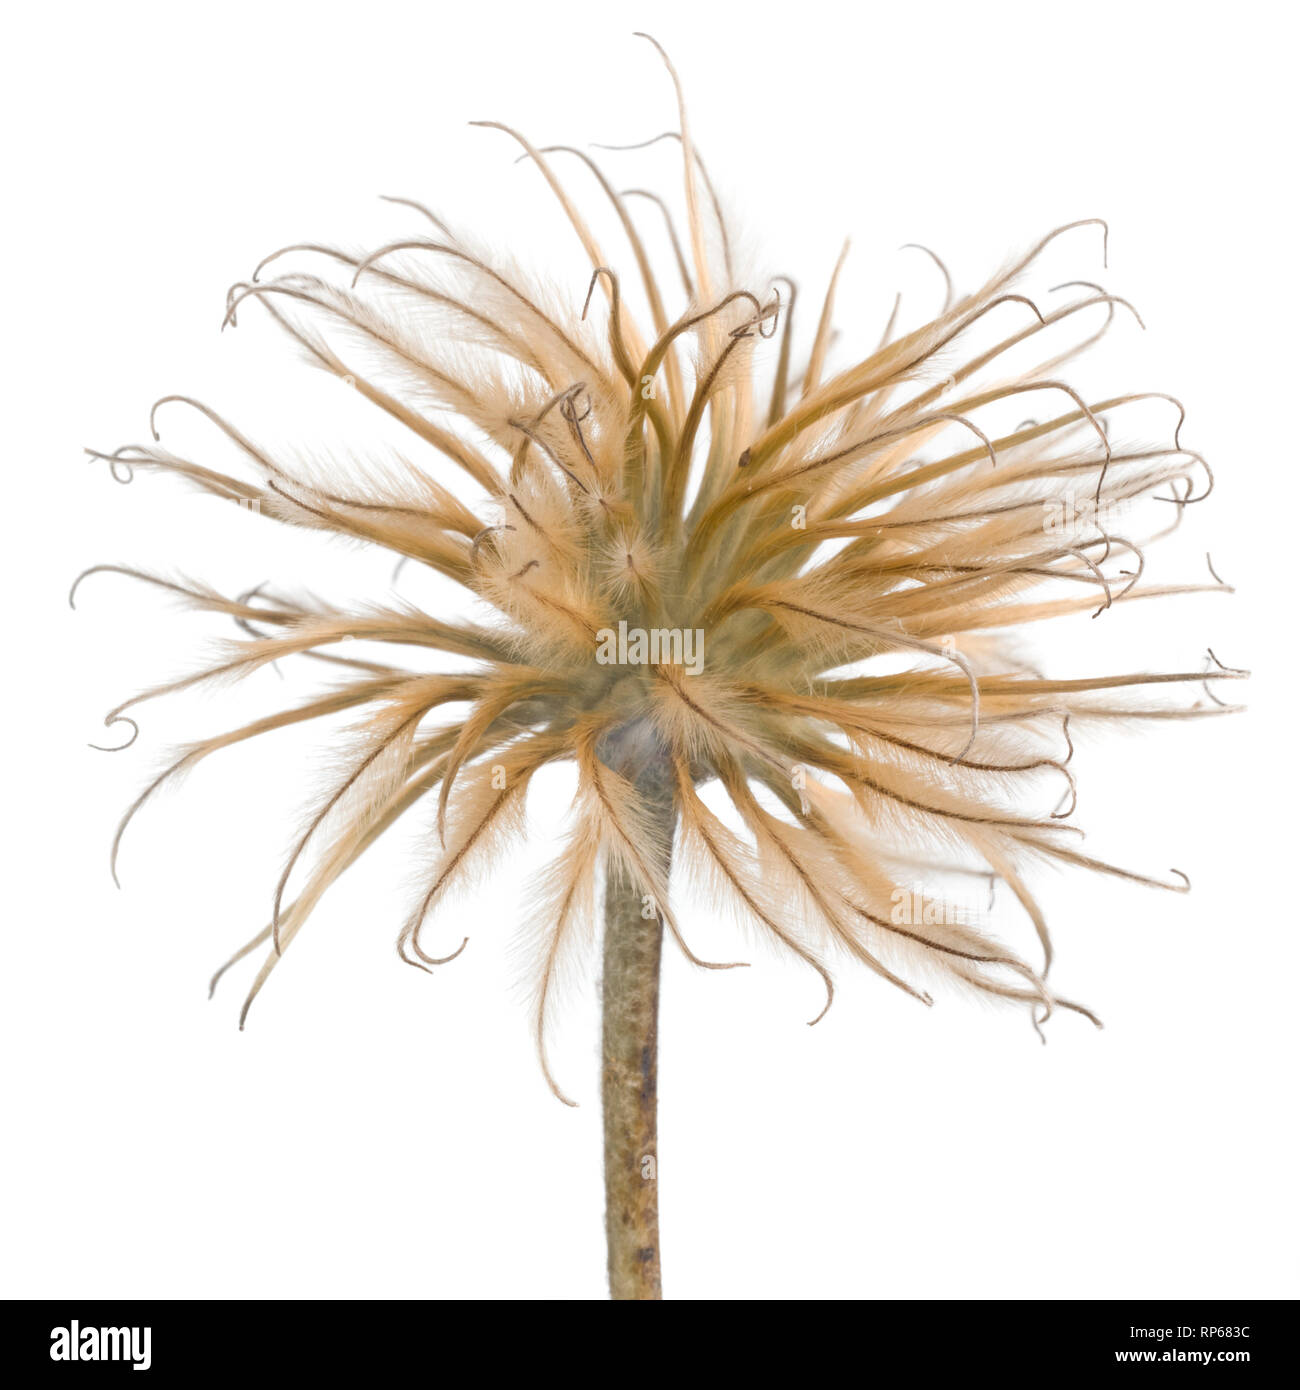 Clematis Seed Head against White Background Stock Photo